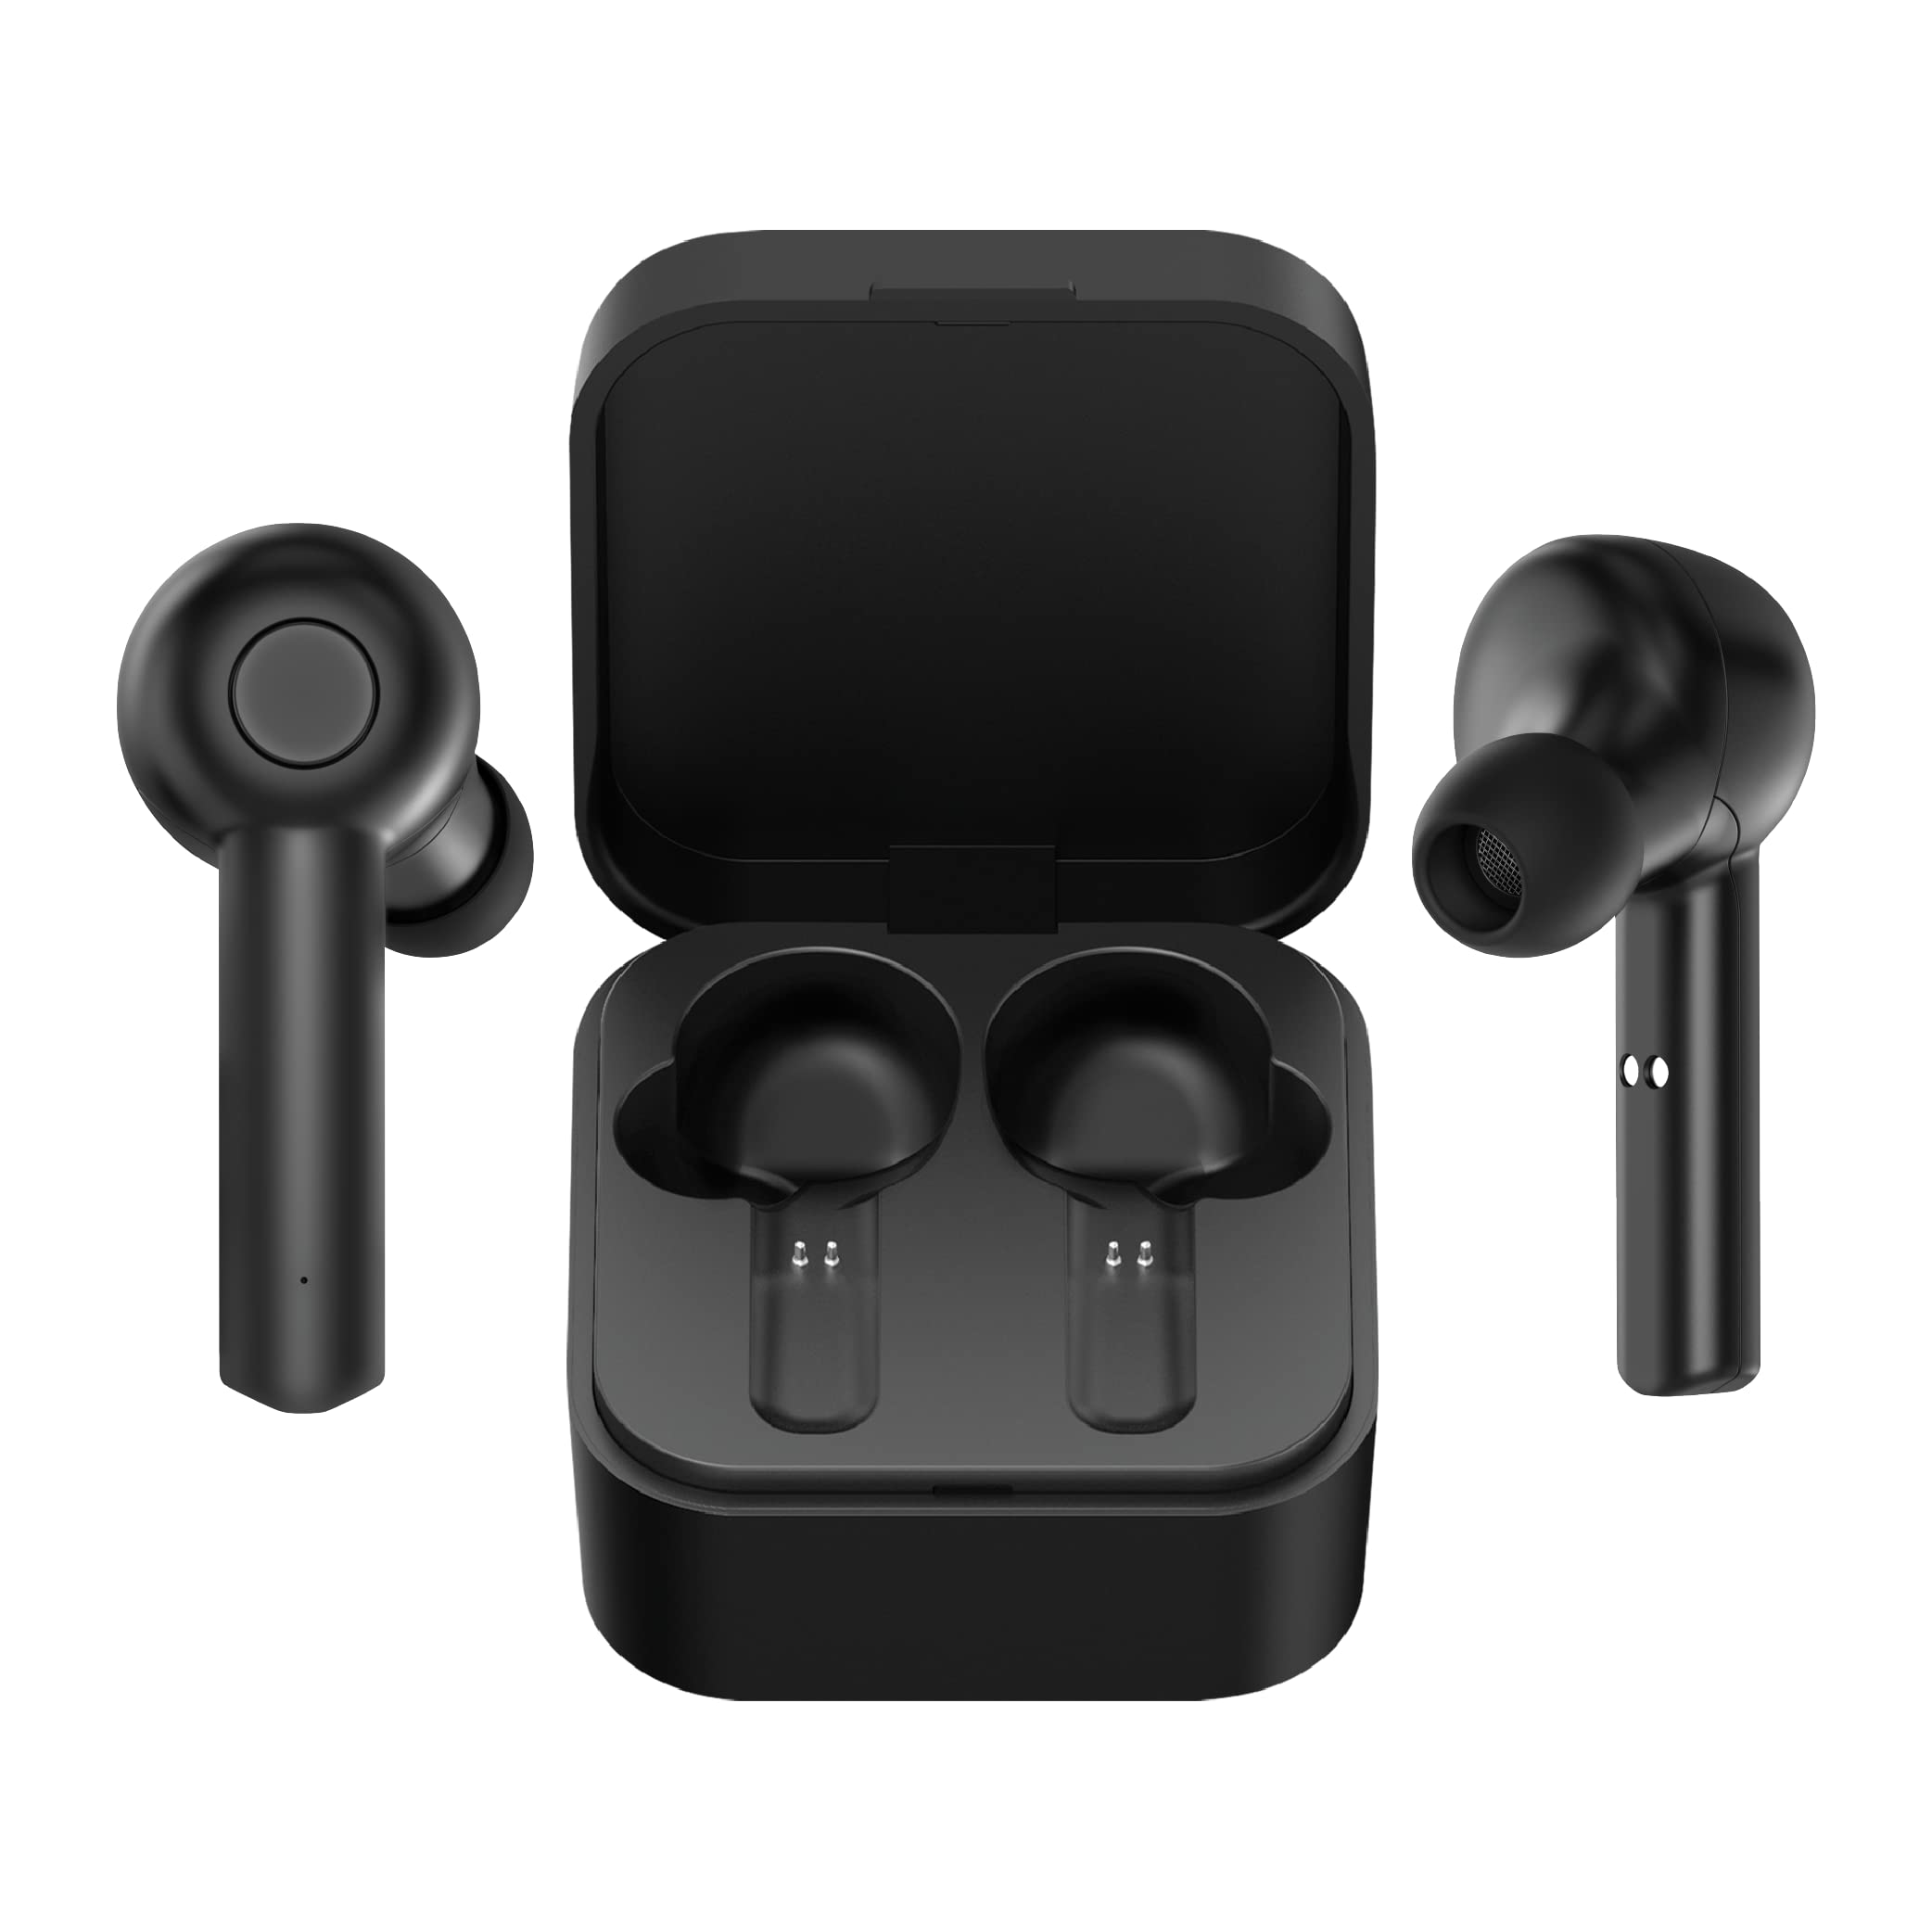 Connecting Coby Wireless Earbuds: A Quick Tutorial